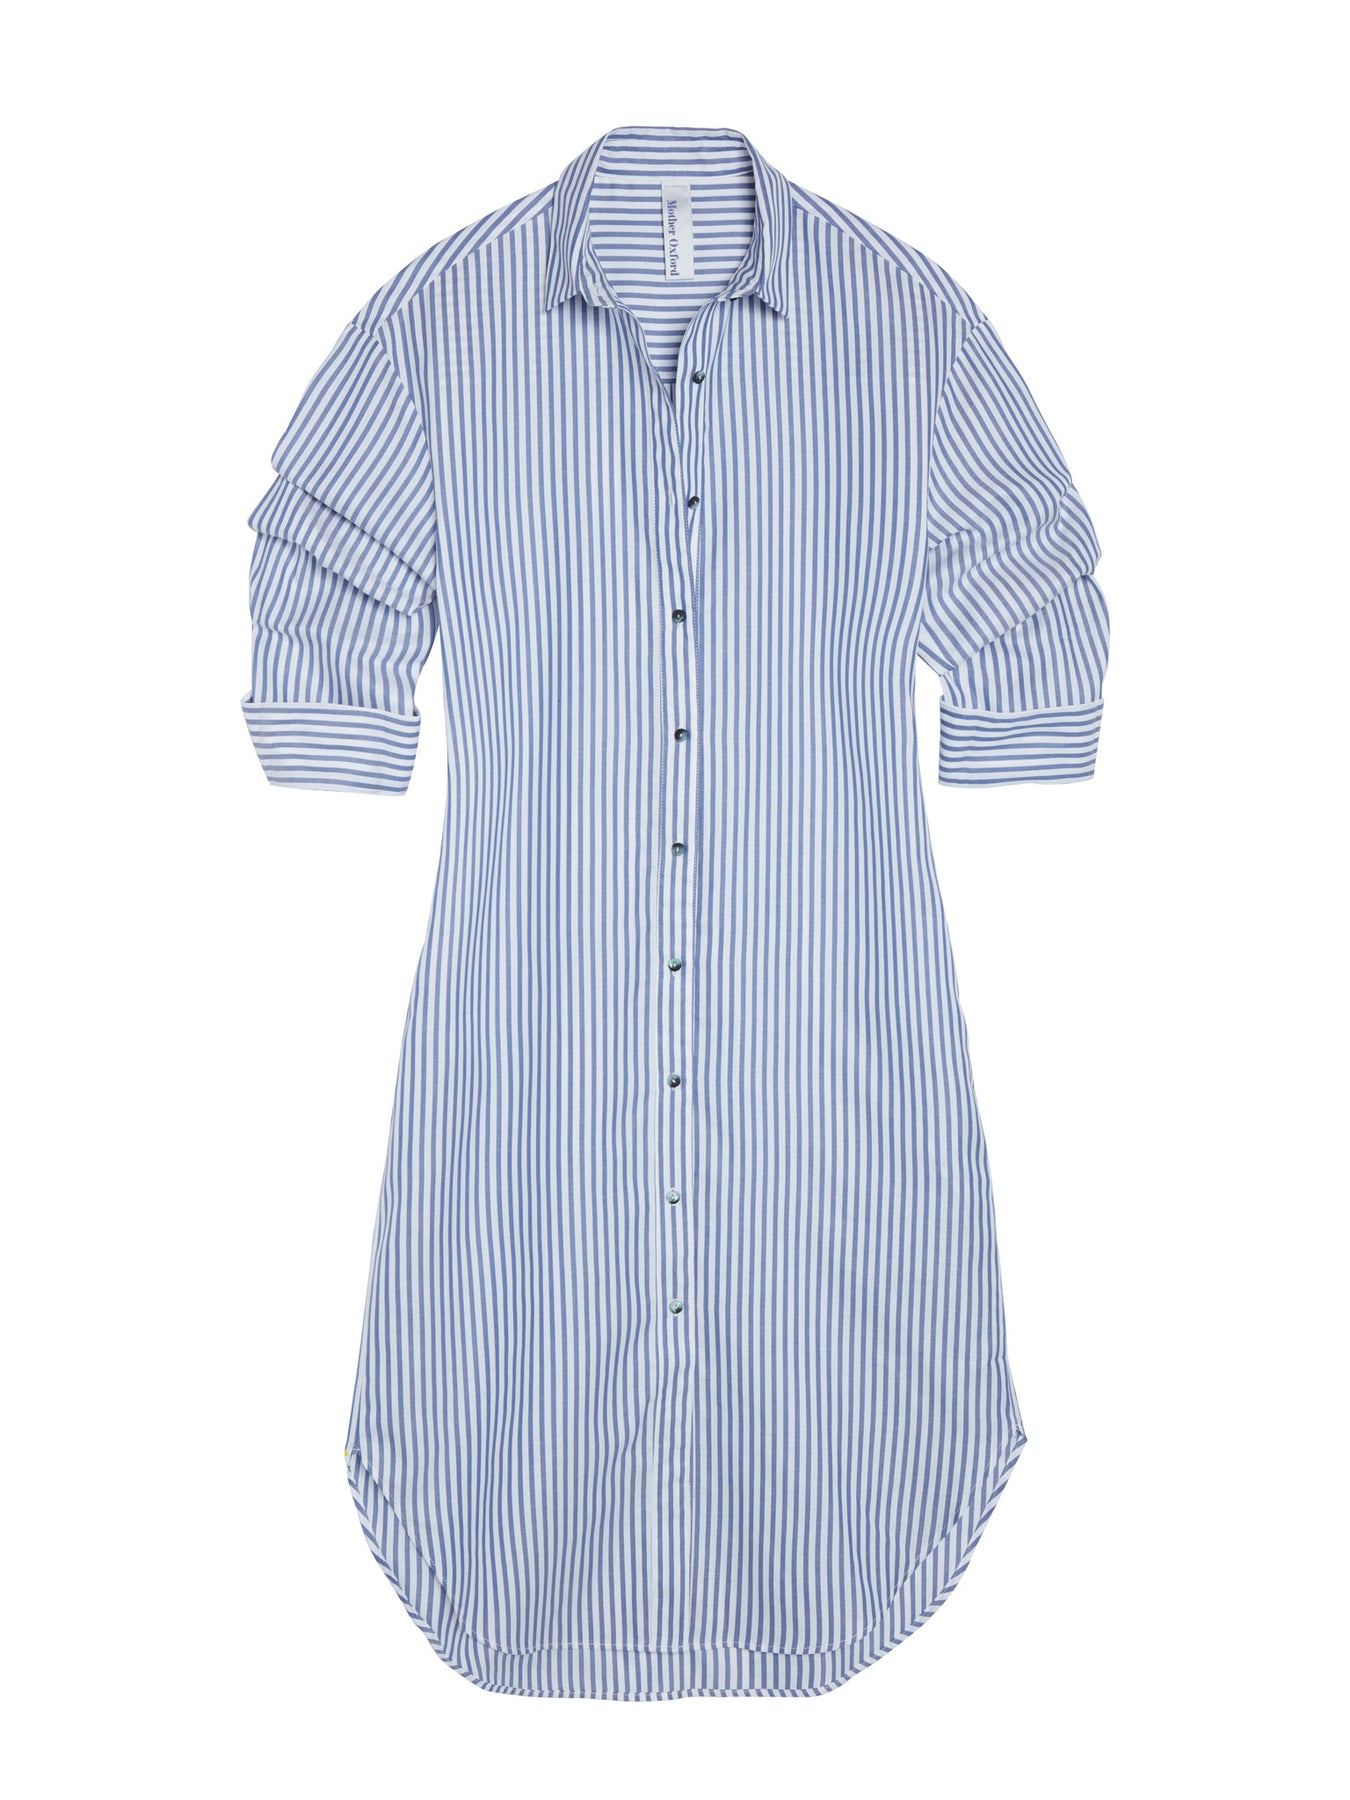 Mother Oxford Essential White Oxford Shirt Dress for Women